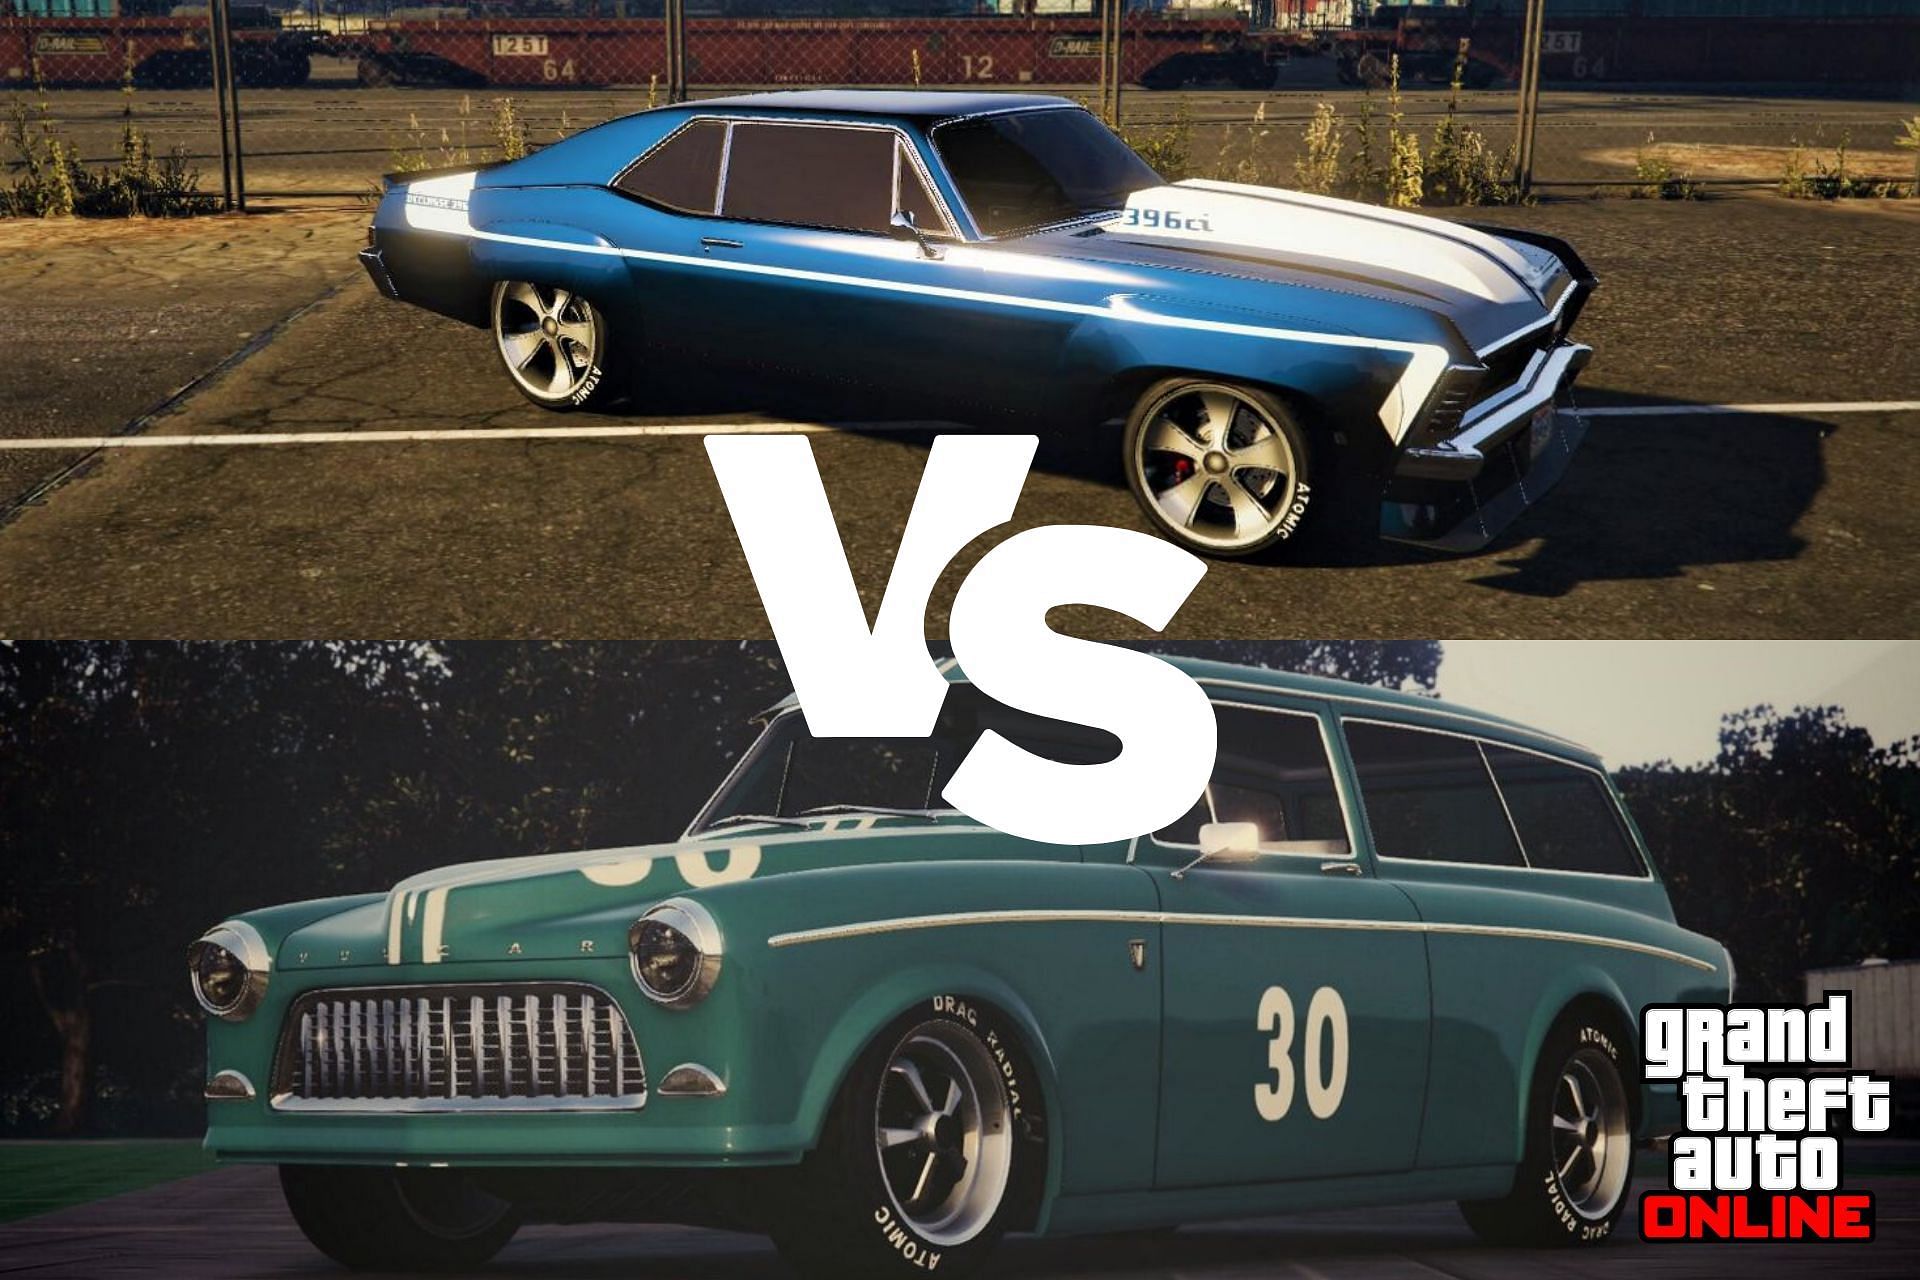 Felagoa or the Vamos: Which one is the best for GTA Online players? (Images via Sportskeeda)